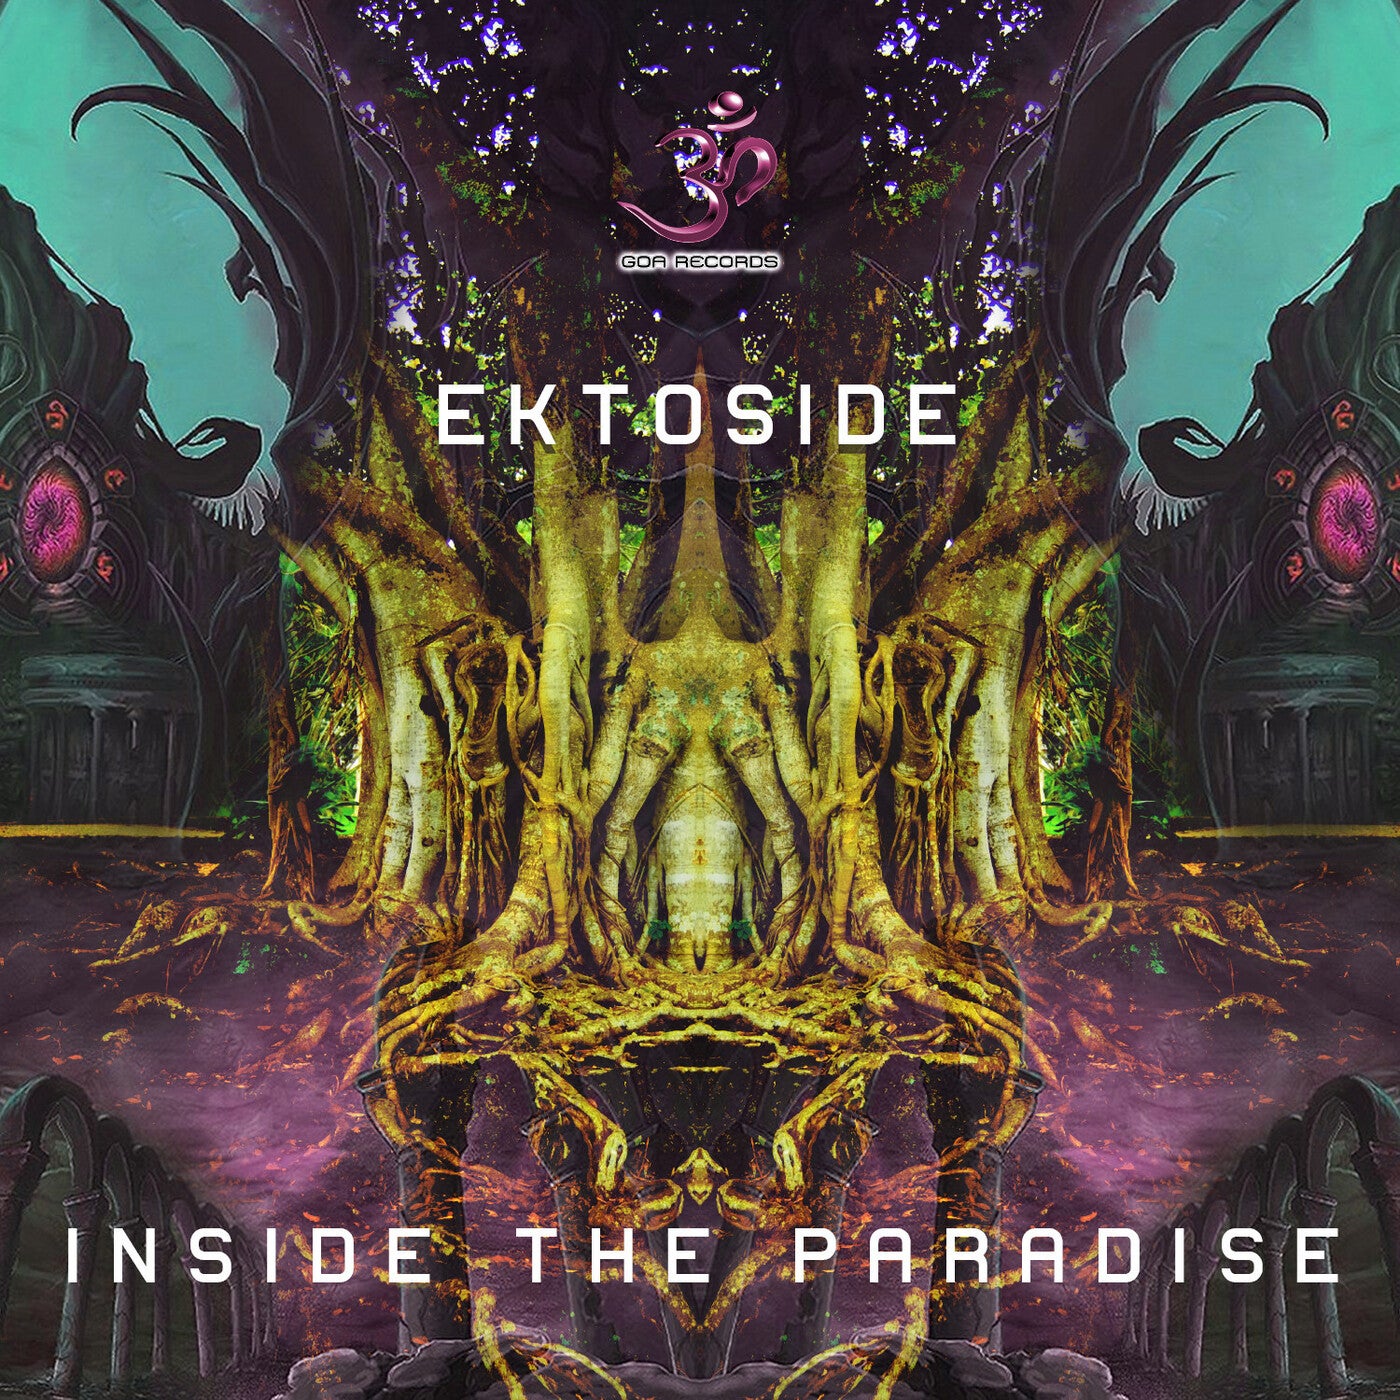 Inside the Paradise